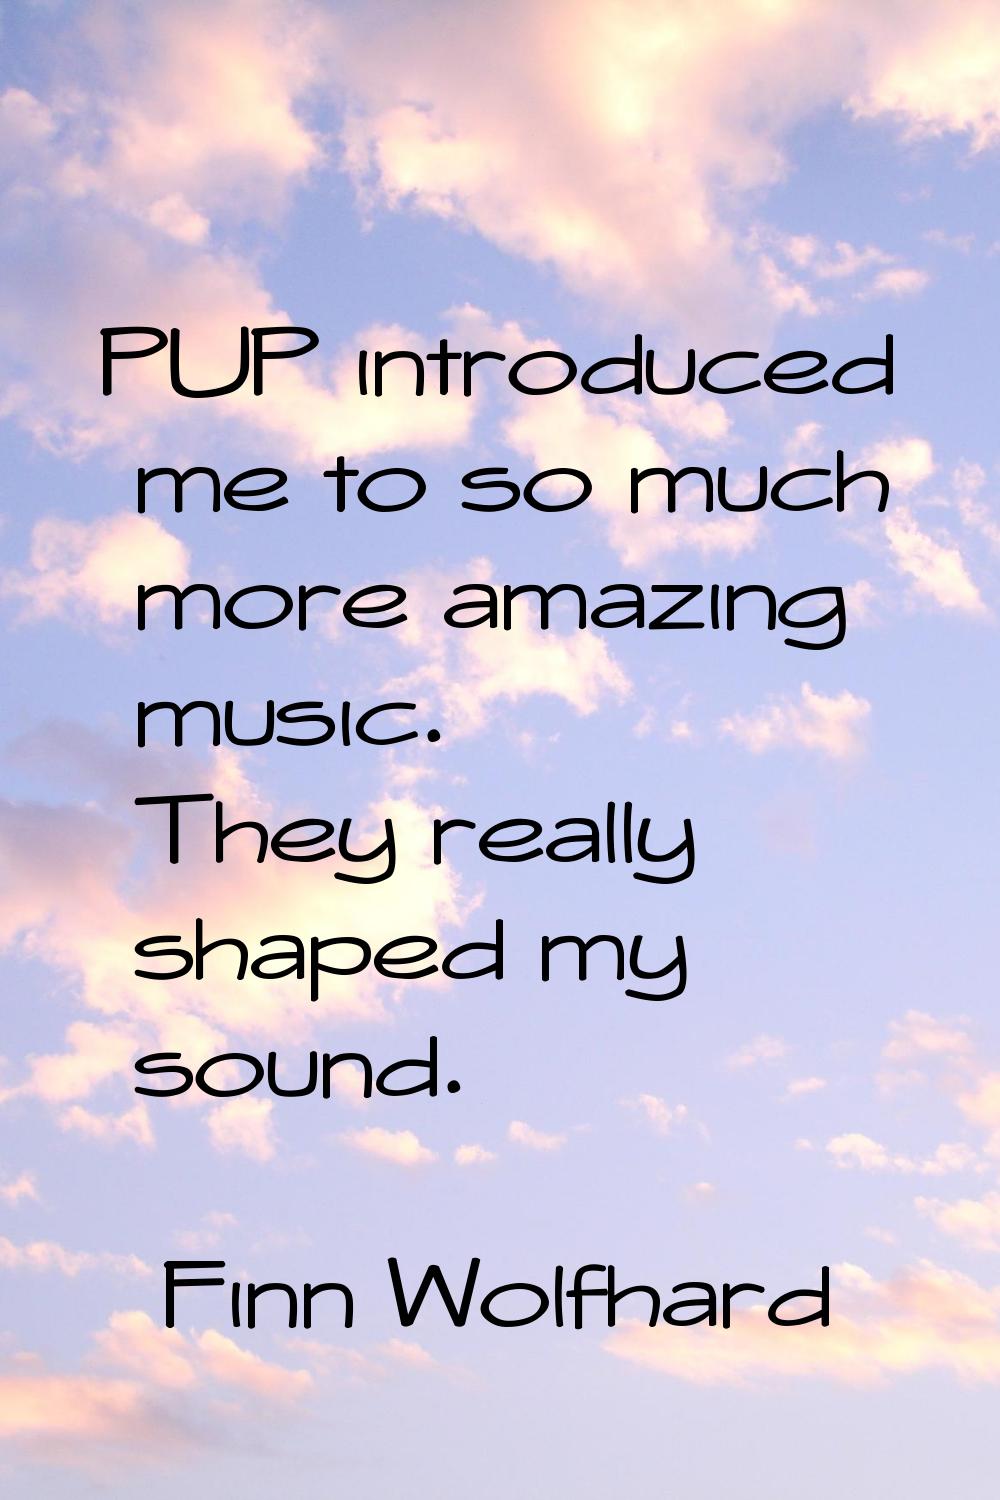 PUP introduced me to so much more amazing music. They really shaped my sound.